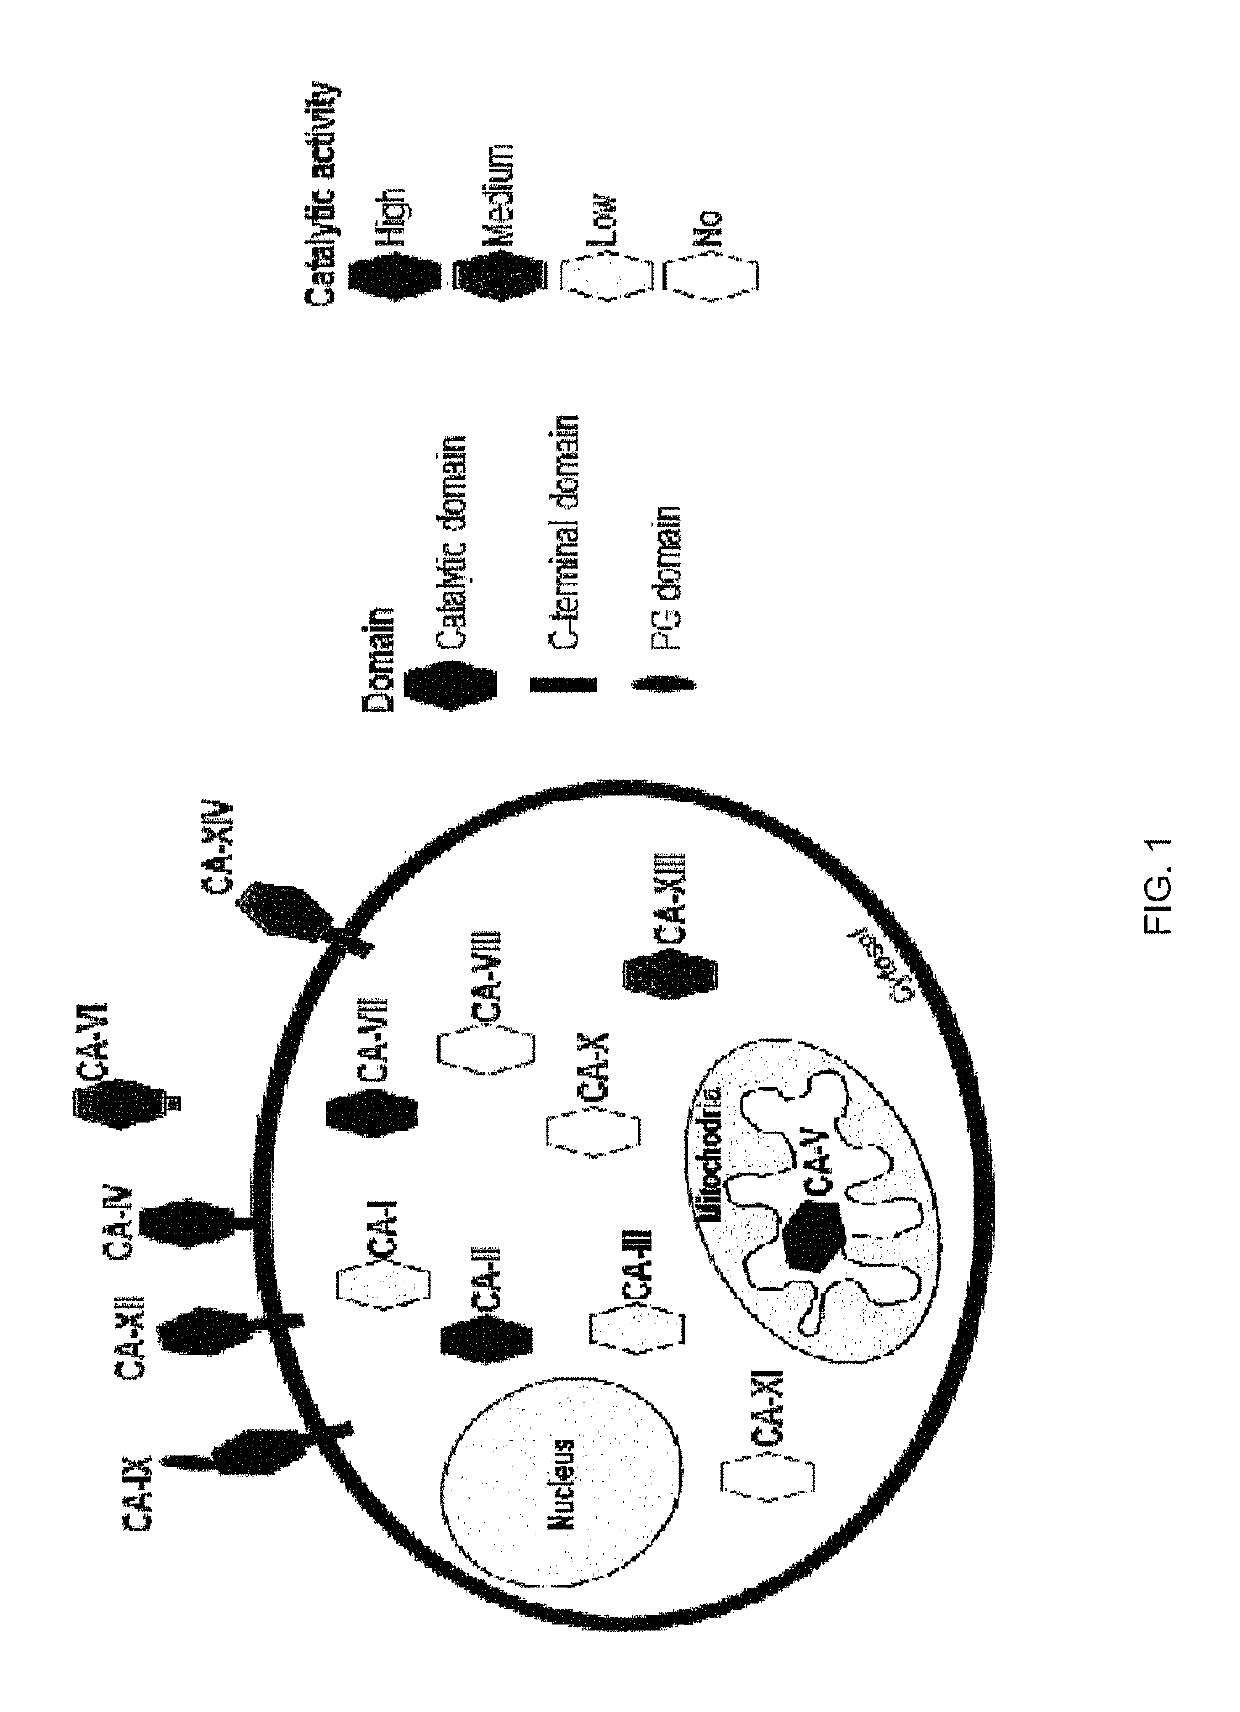 Carbonic anhydrase IX-specific antibodies and uses thereof